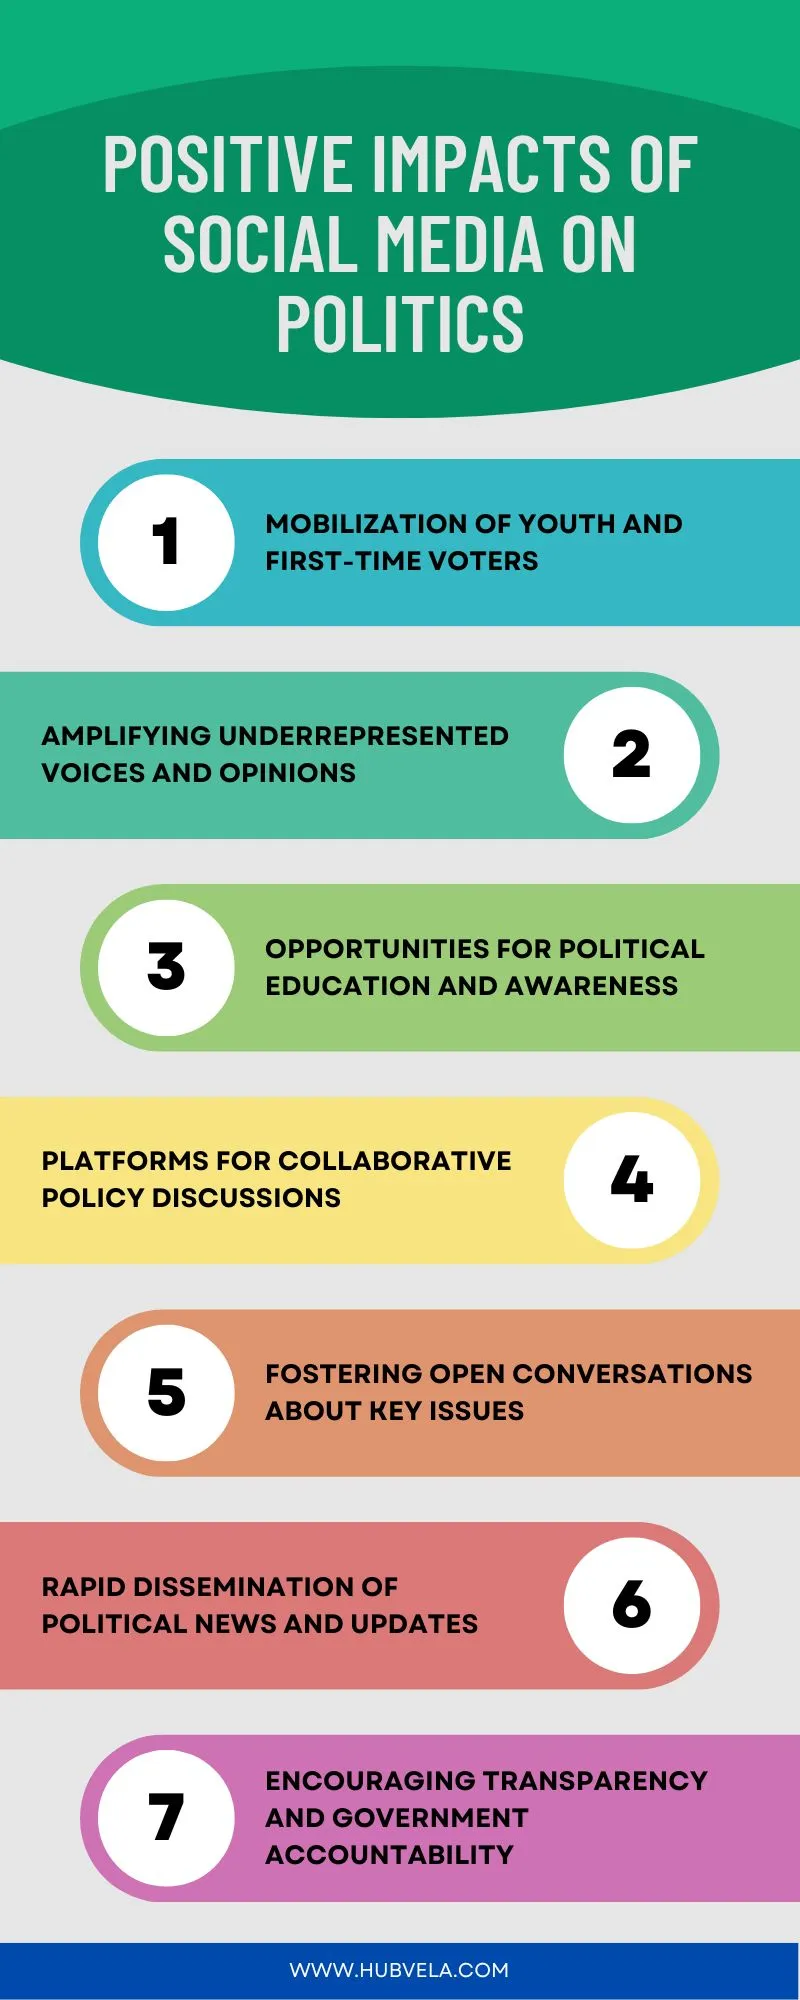 Positive Impacts of Social Media on Politics Infographic